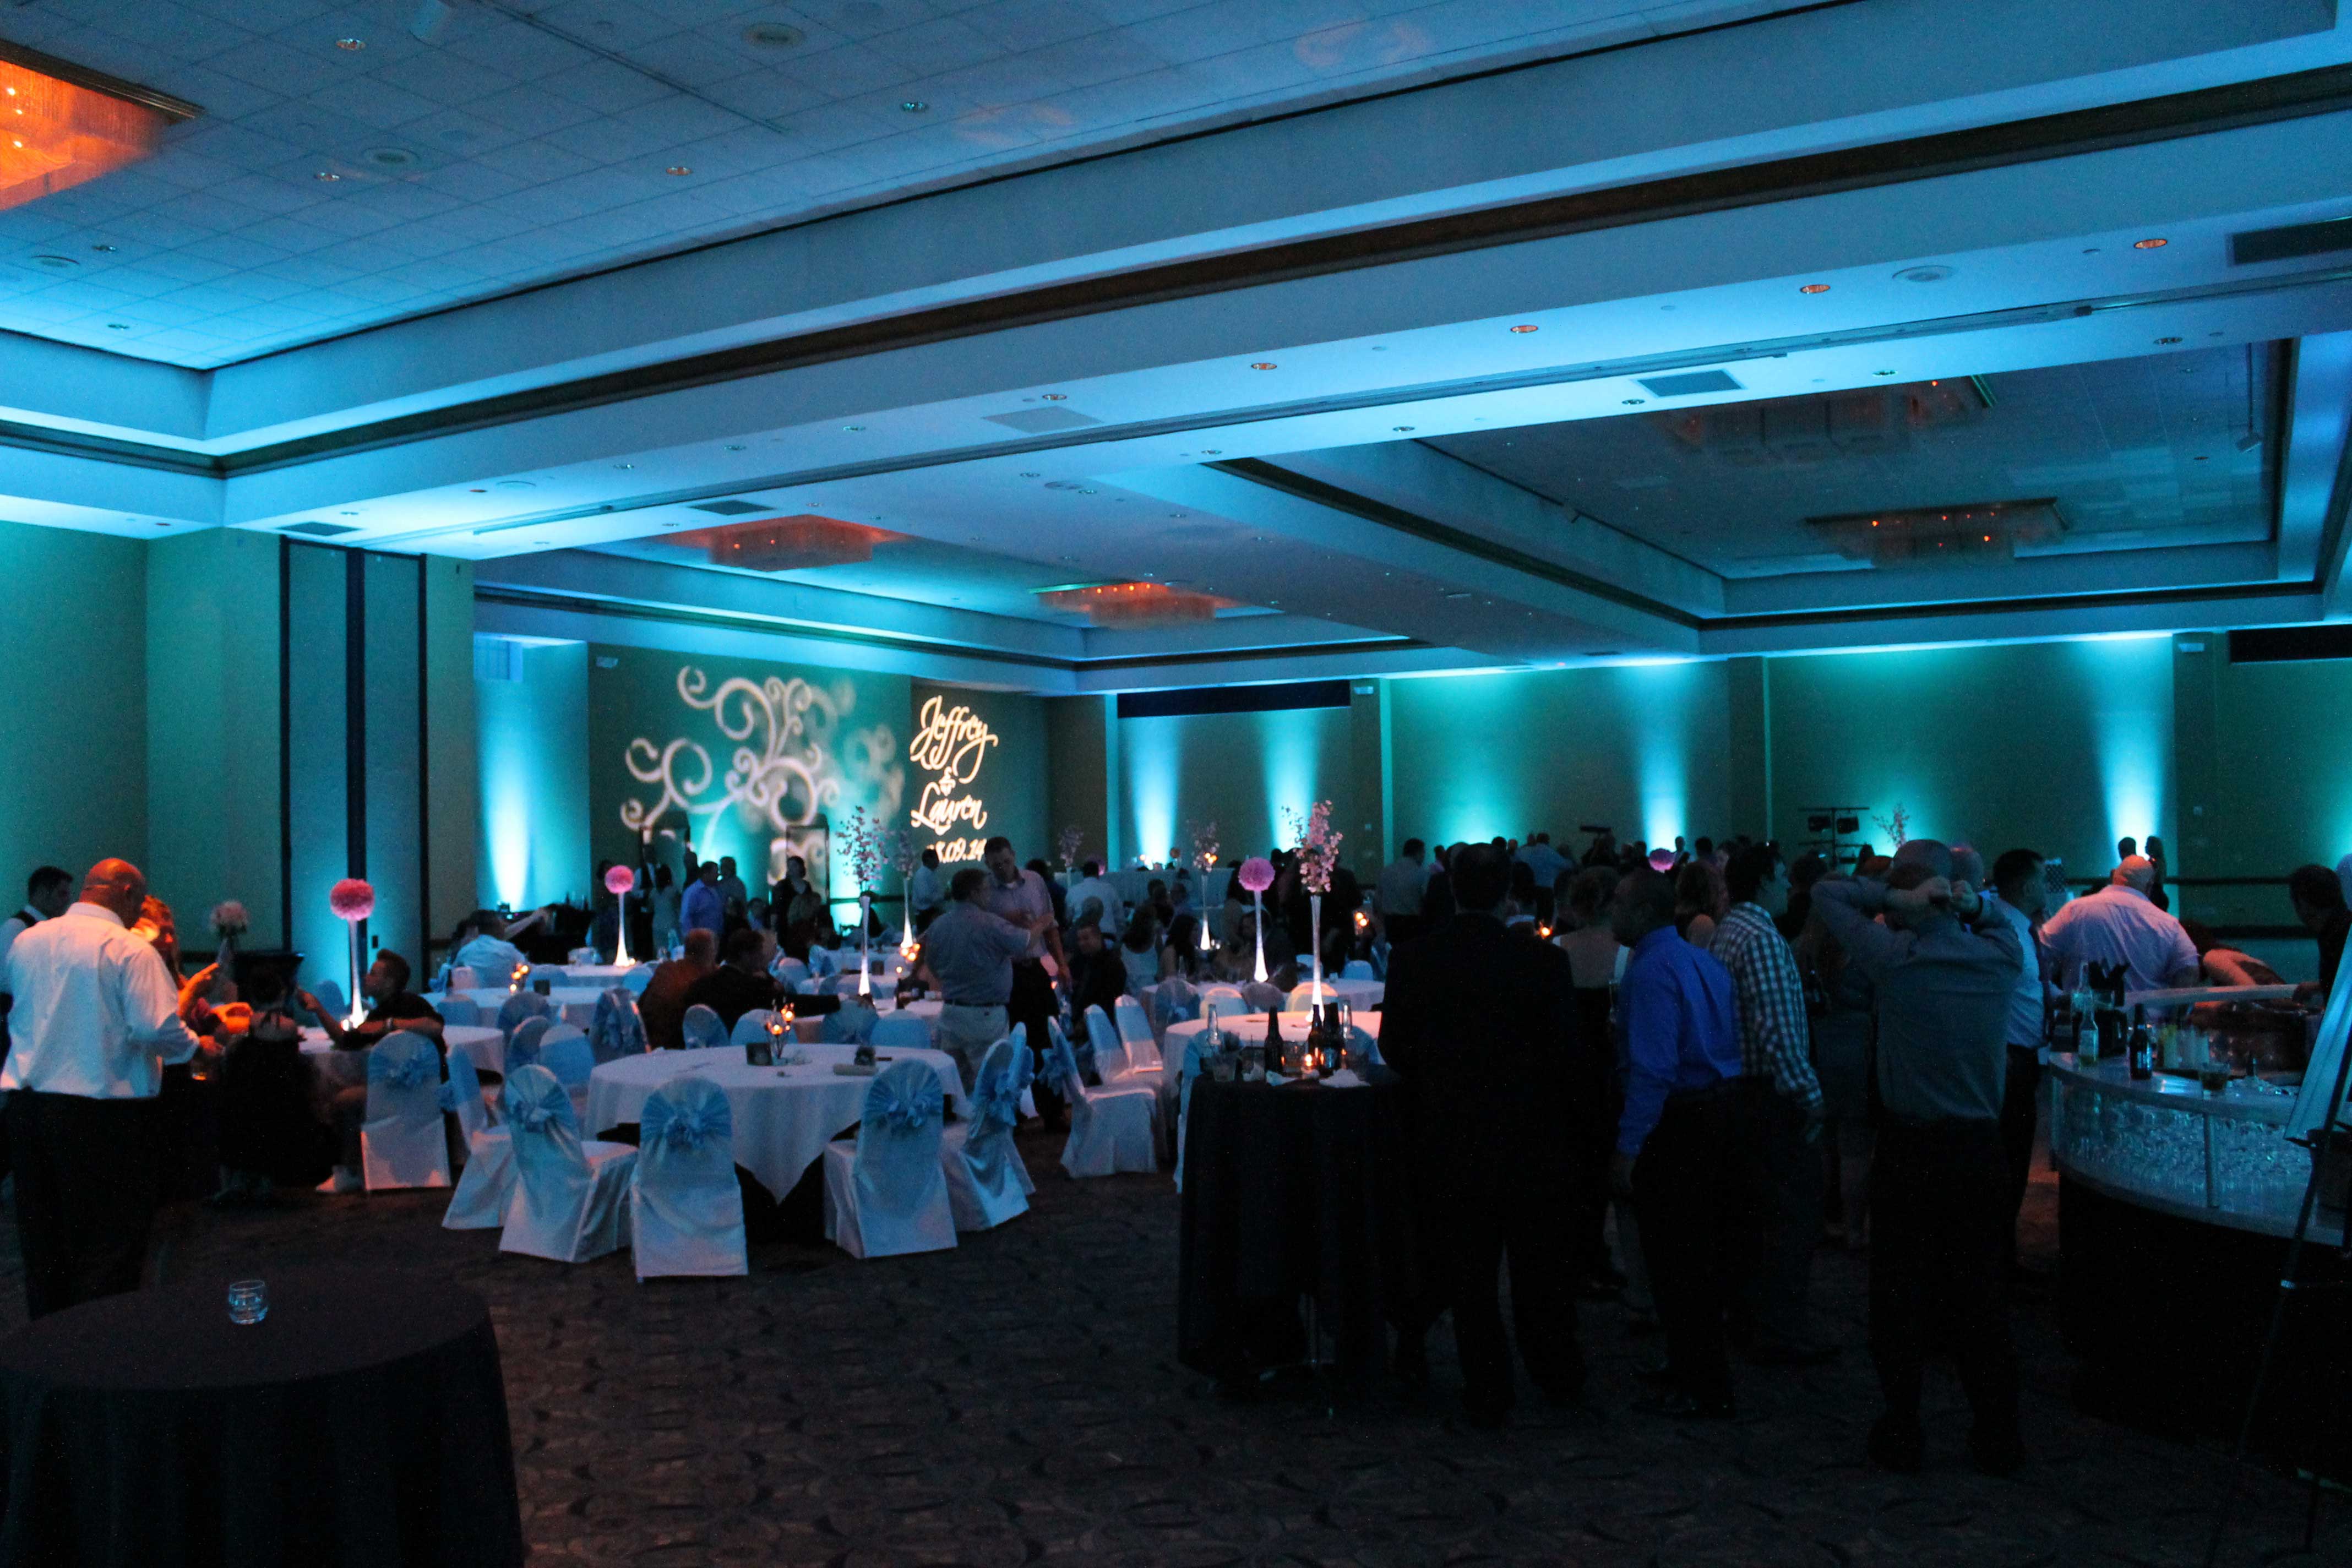 Uplighting Transforms the Look of Your Venue